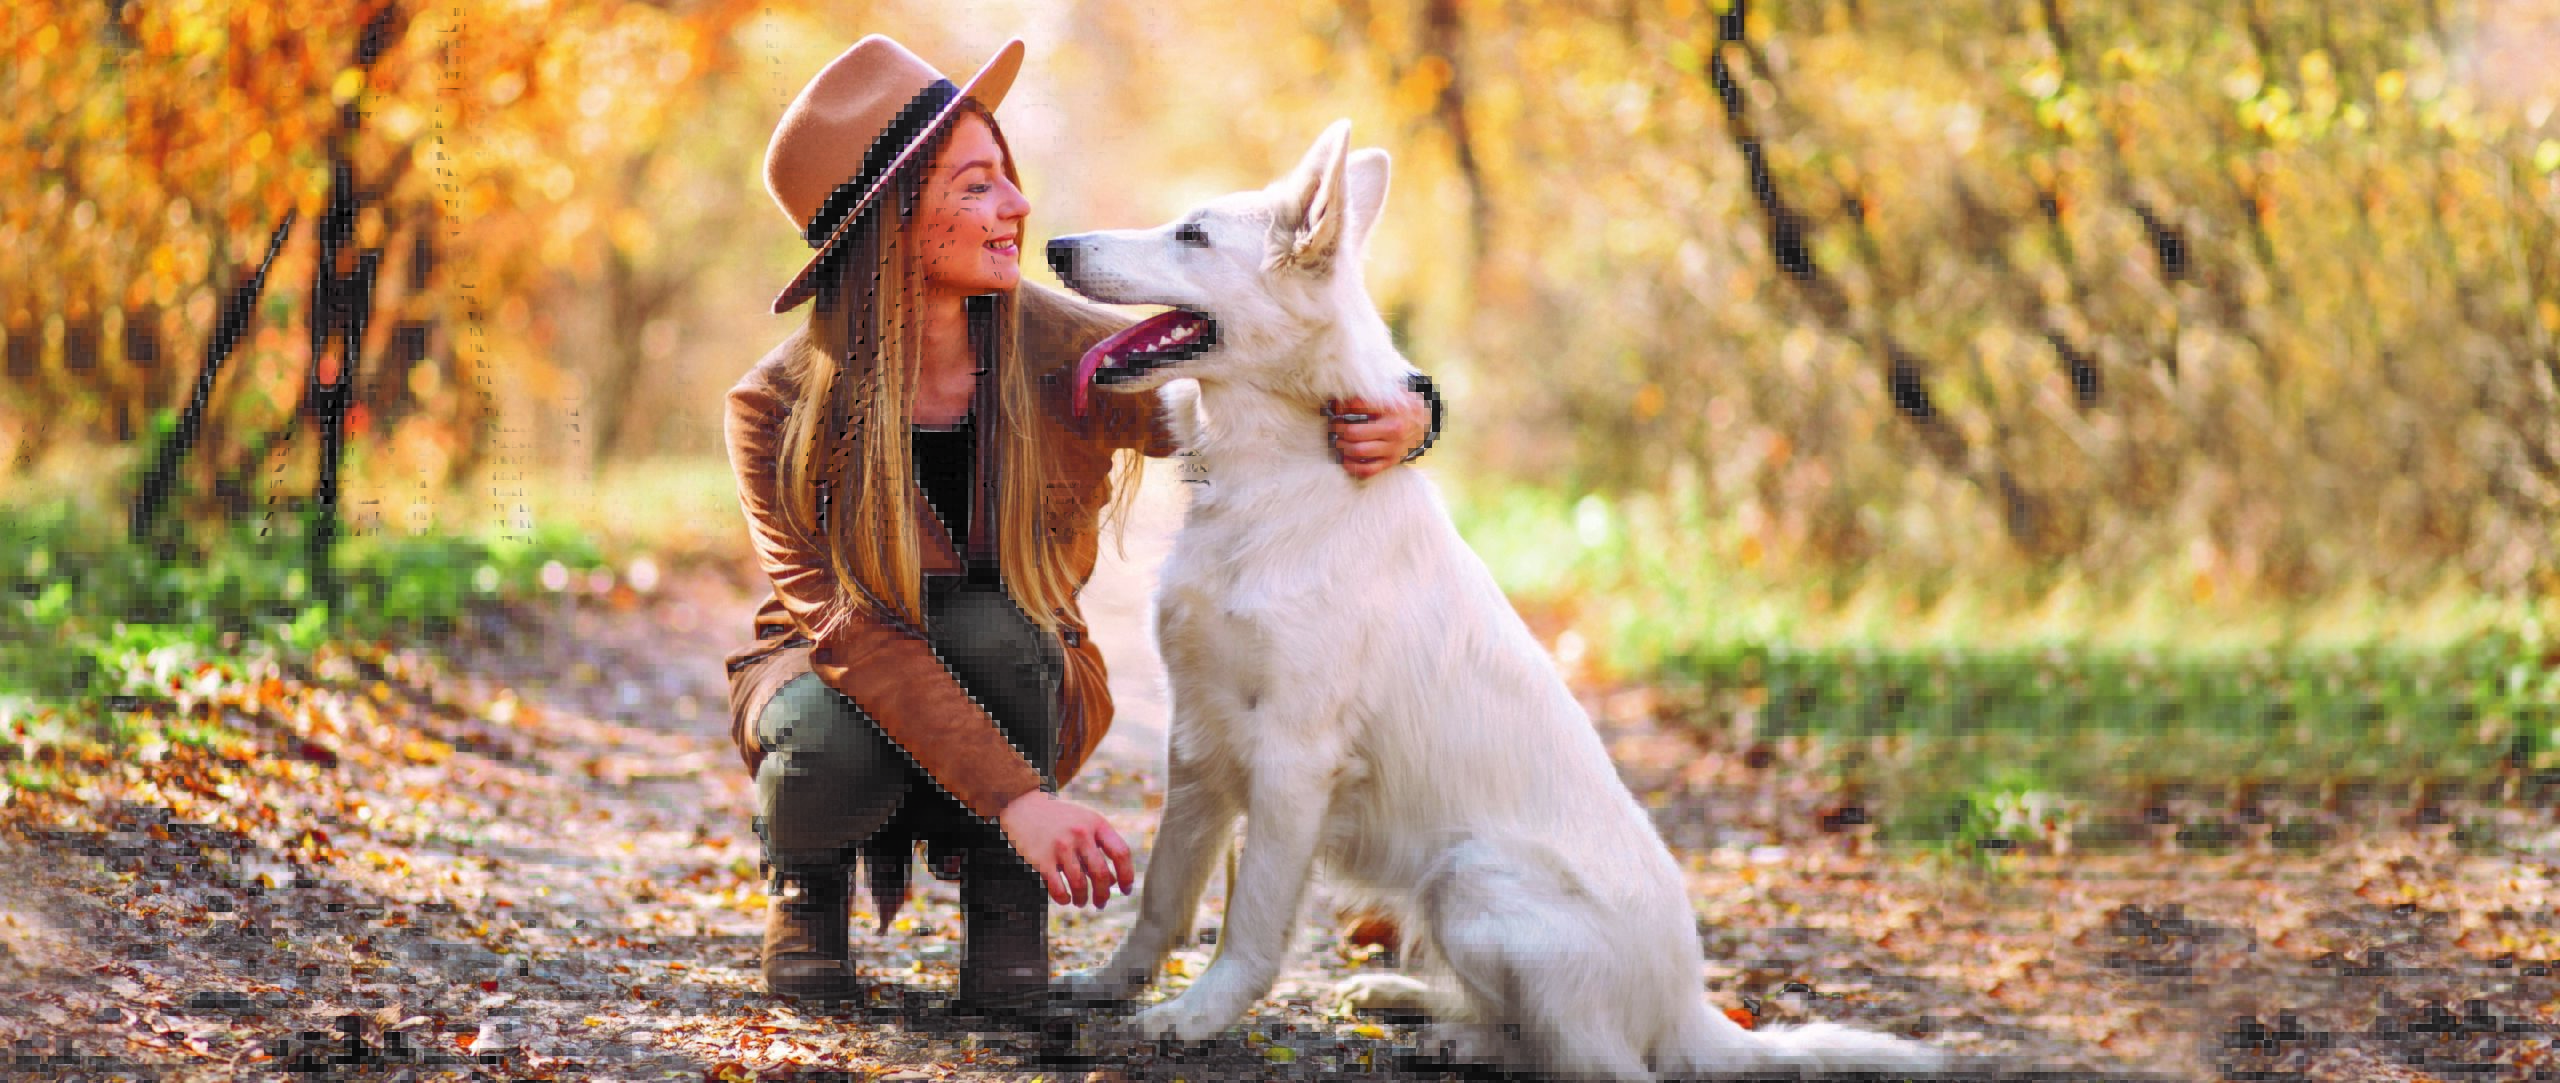 Woman wearing a fedora looking lovingly at her shepherd dog